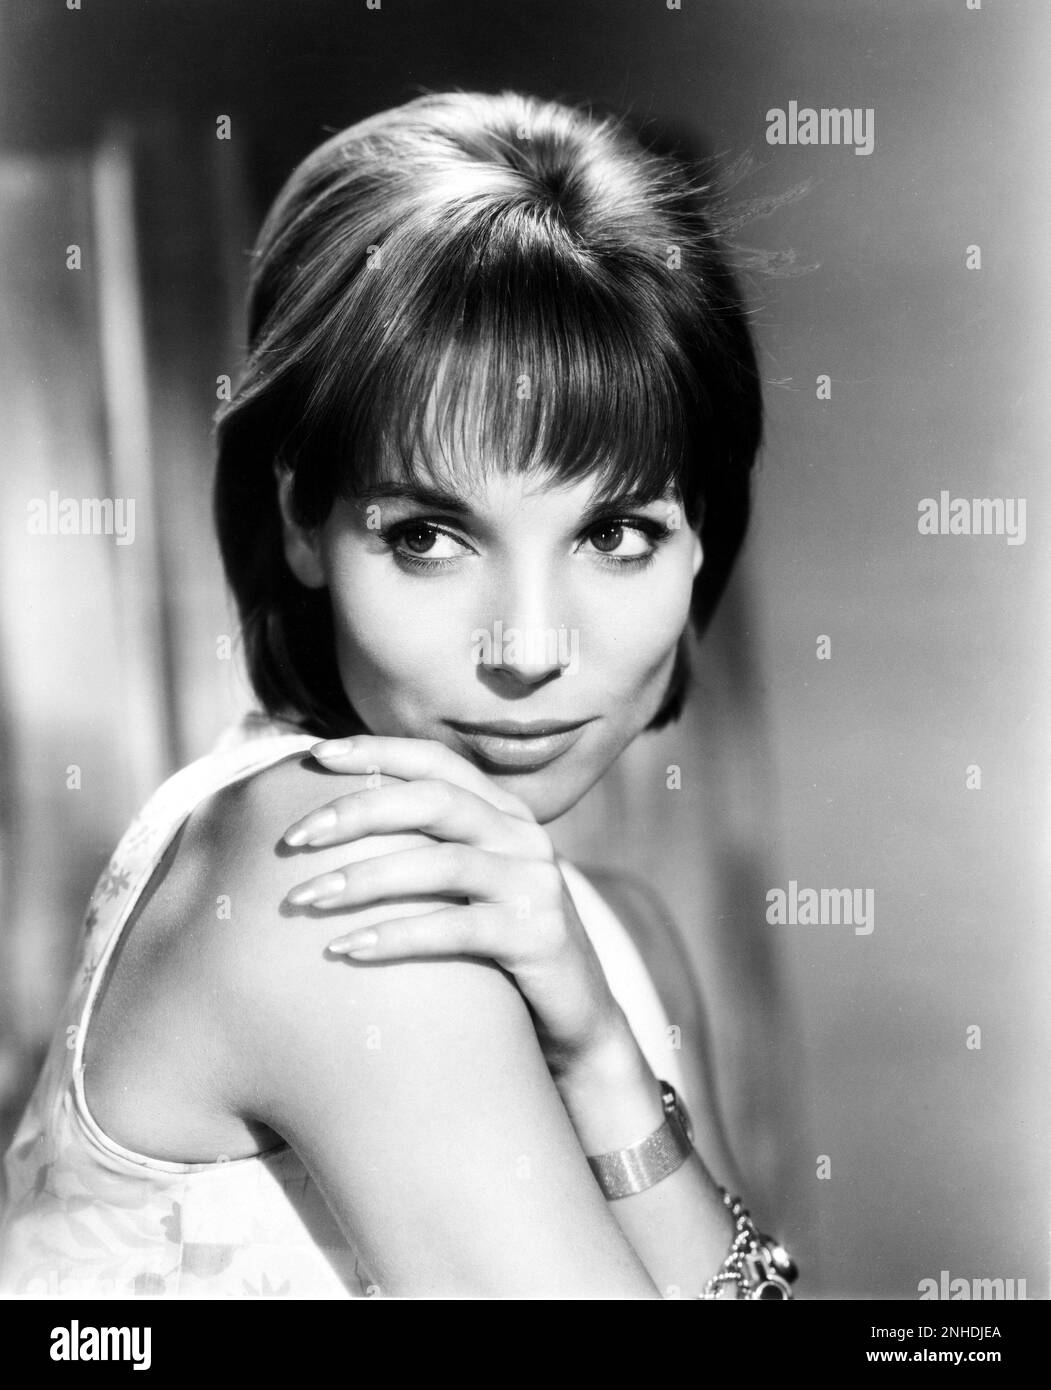 1962 : the italian actress ELSA MARTINELLI ( born in Rome , Italy , 1935 ) in Hollywood productions , pubblicity still for the movie HATARI ! by Howard Hawks - Paramount Pictures Corporation - MOVIE - CINEMA - FILM - portrait - ritratto - bracelet - braccialetto - hands - mano - mani - unghie - nails  ----  Archivio GBB Stock Photo